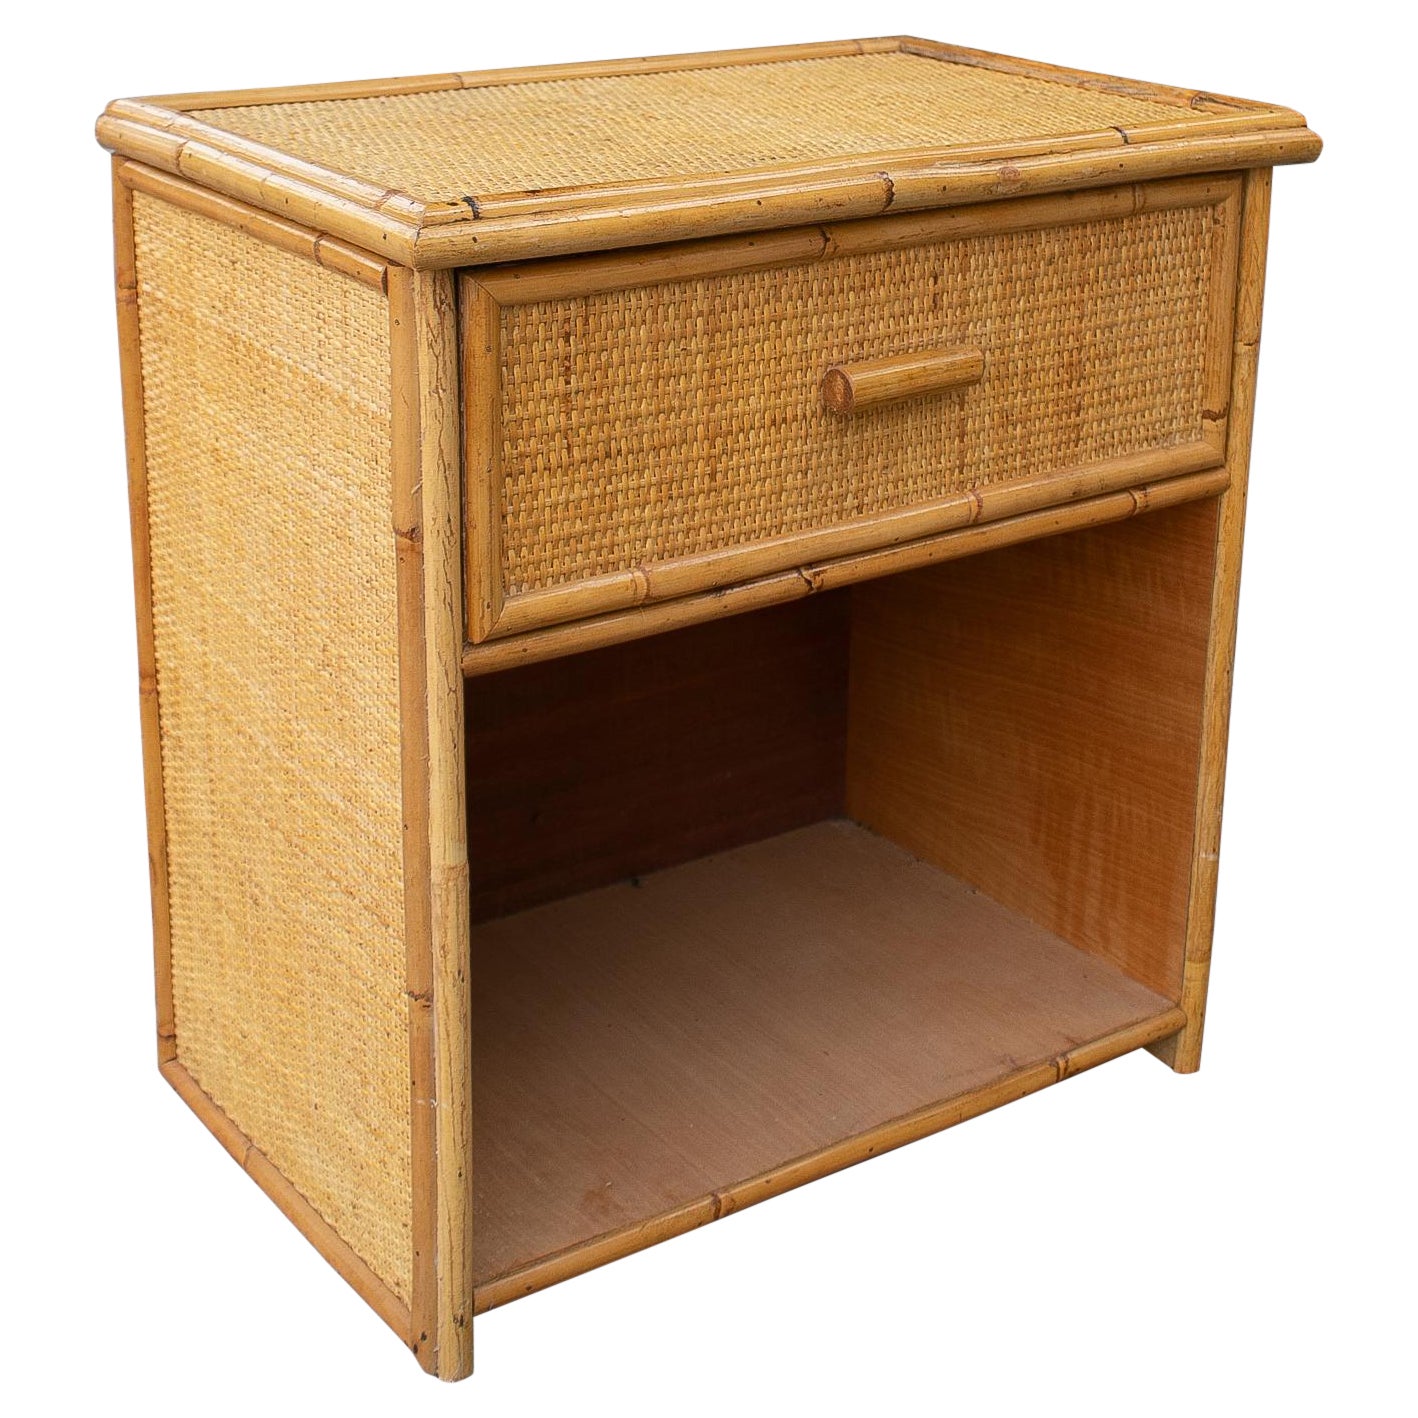 1970's Bamboo and Rattan Bedside Table with Drawers For Sale